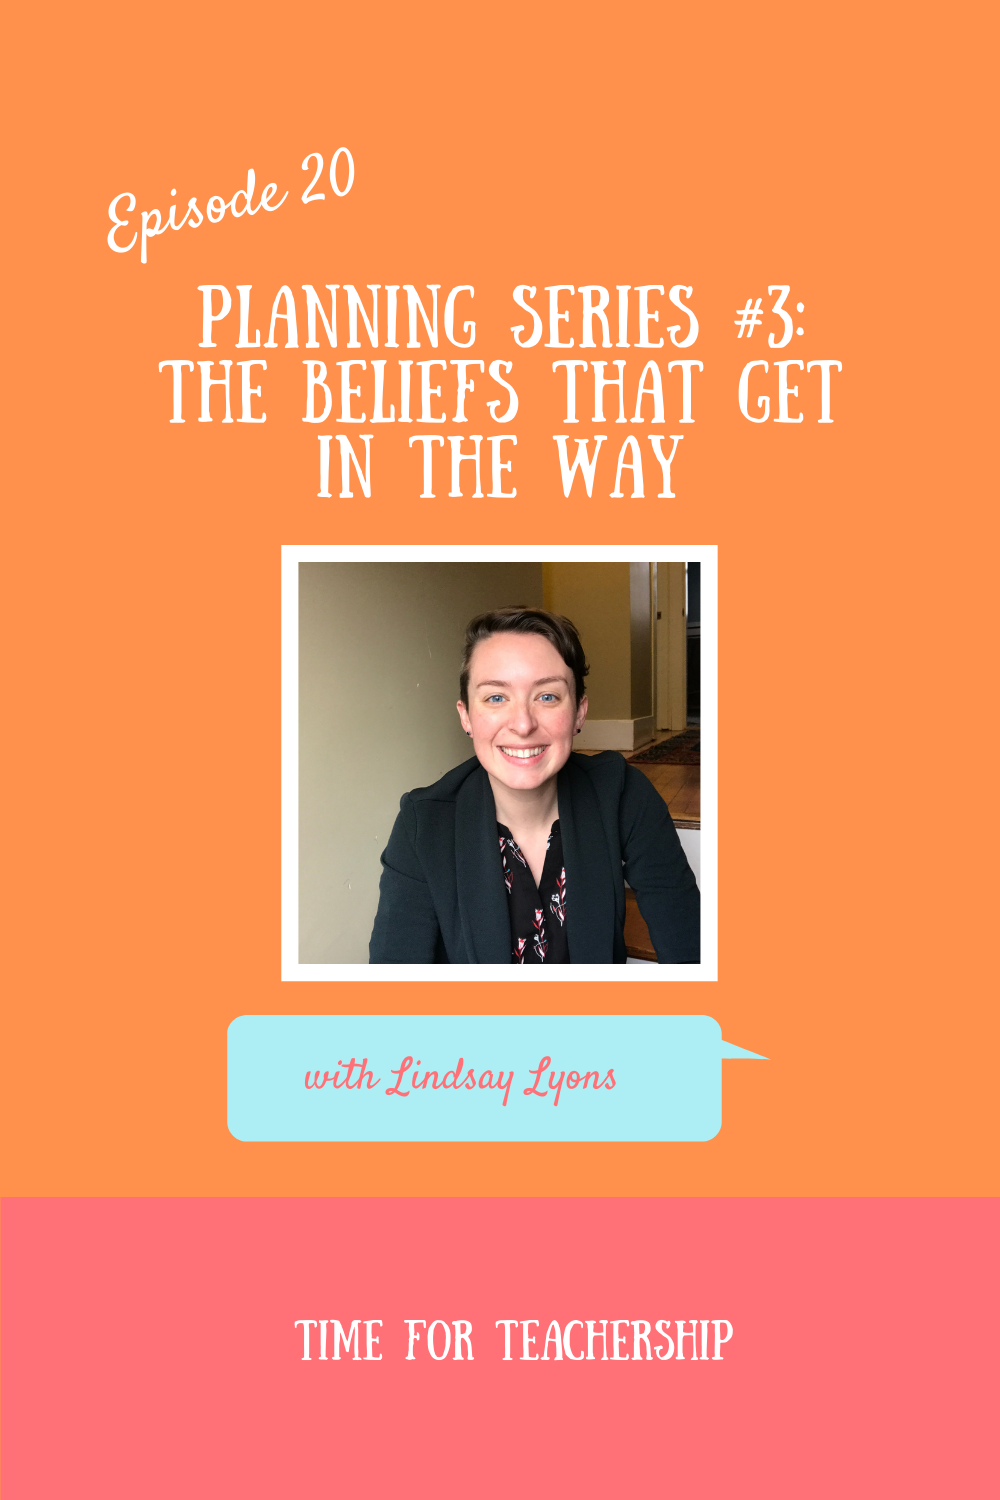 20. Planning Series Part 3: The Beliefs That Get In The Way. Today, you will learn to figure out what's holding you back when it comes to laying out your aspirations. Research shows the amazing benefits your students can have by incorporating more PD and teacher learning in your life. Read the Time for Teachership blog post by Lindsay Lyons for how to get rid of limiting beliefs. For more planning strategies & teacher tips, sign up for weekly emails at bit.ly/lindsayletter.